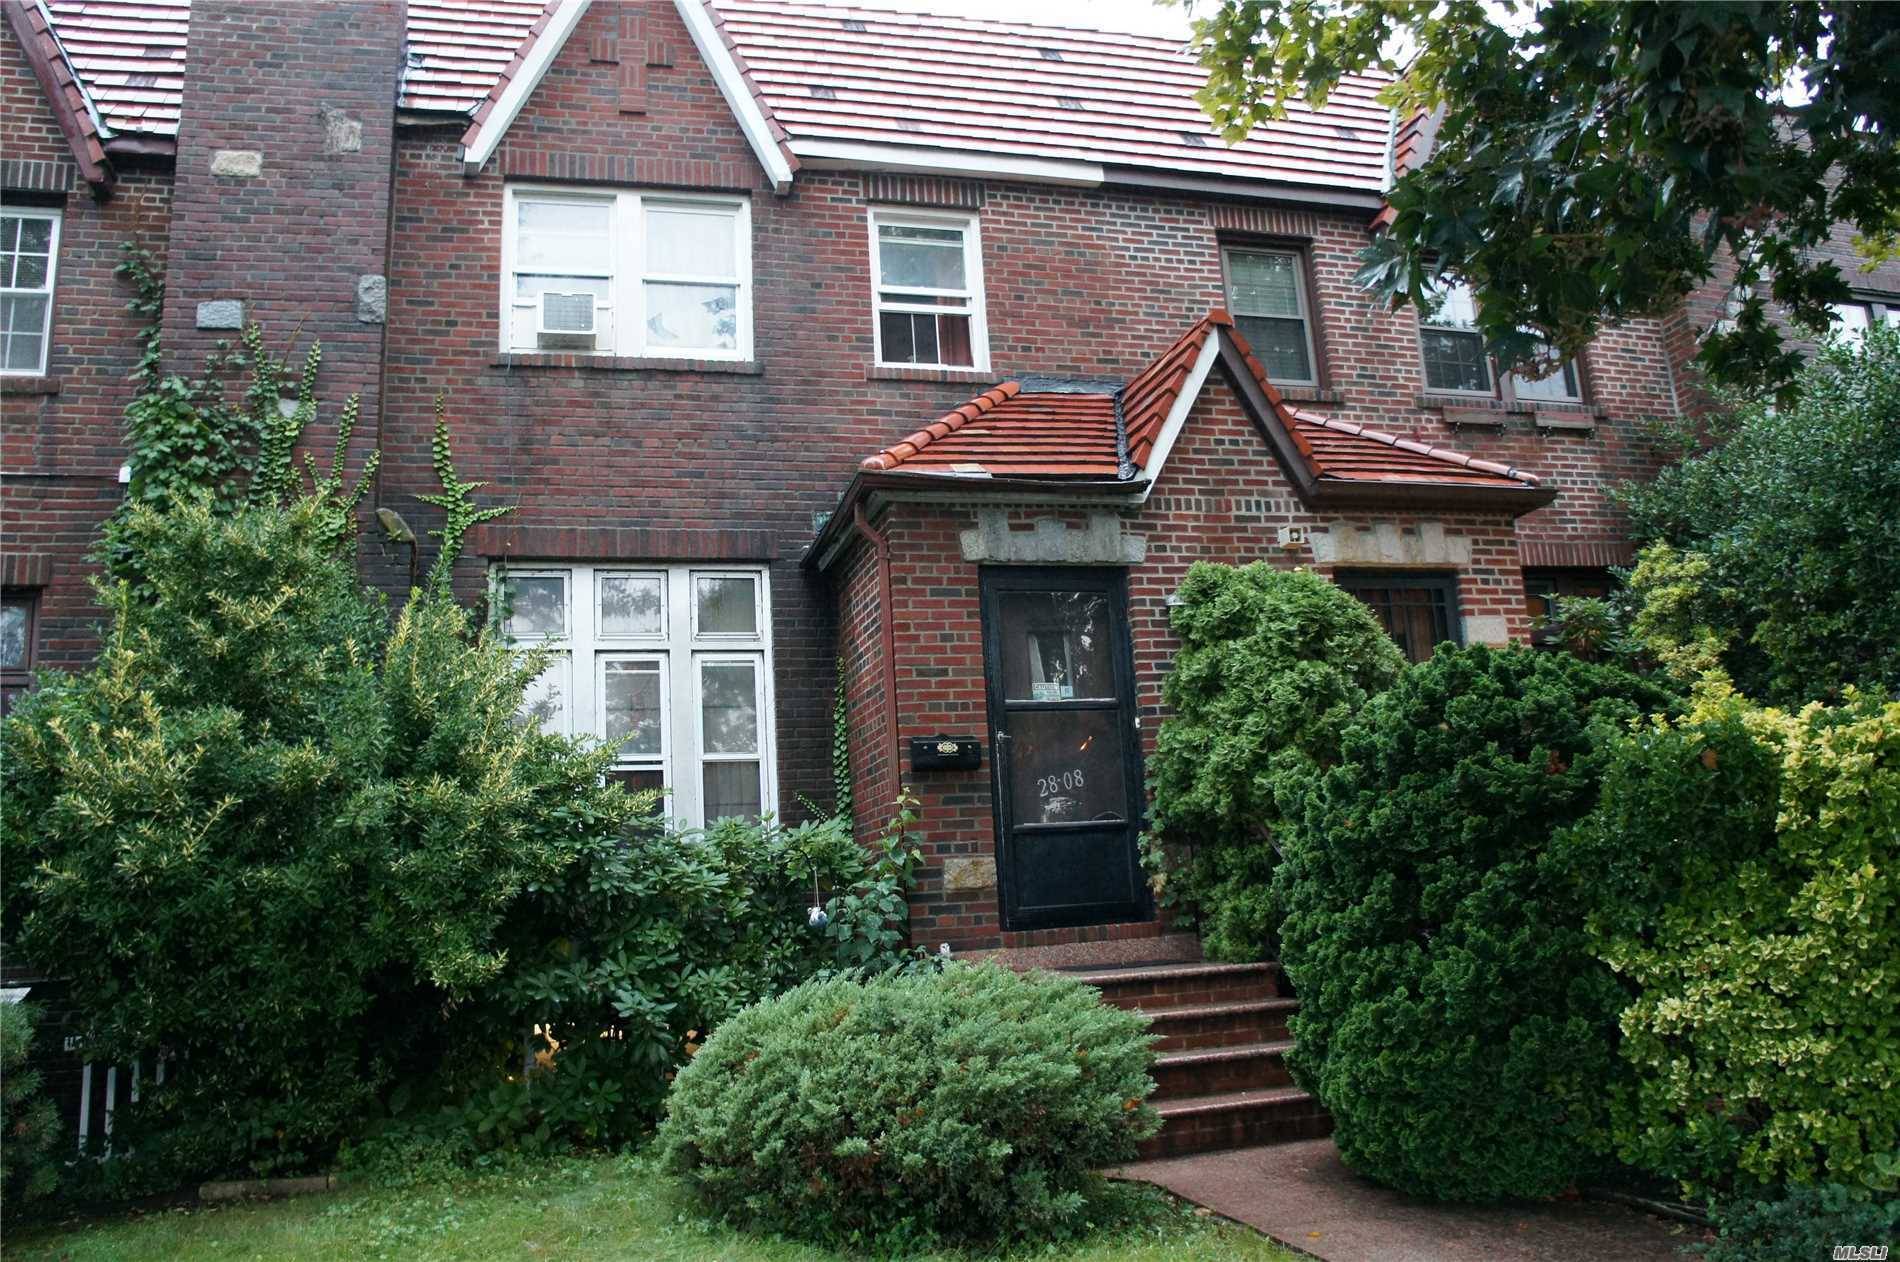 Single Family Tudor Located In The Heart Of Flushing, Close To Transportation.